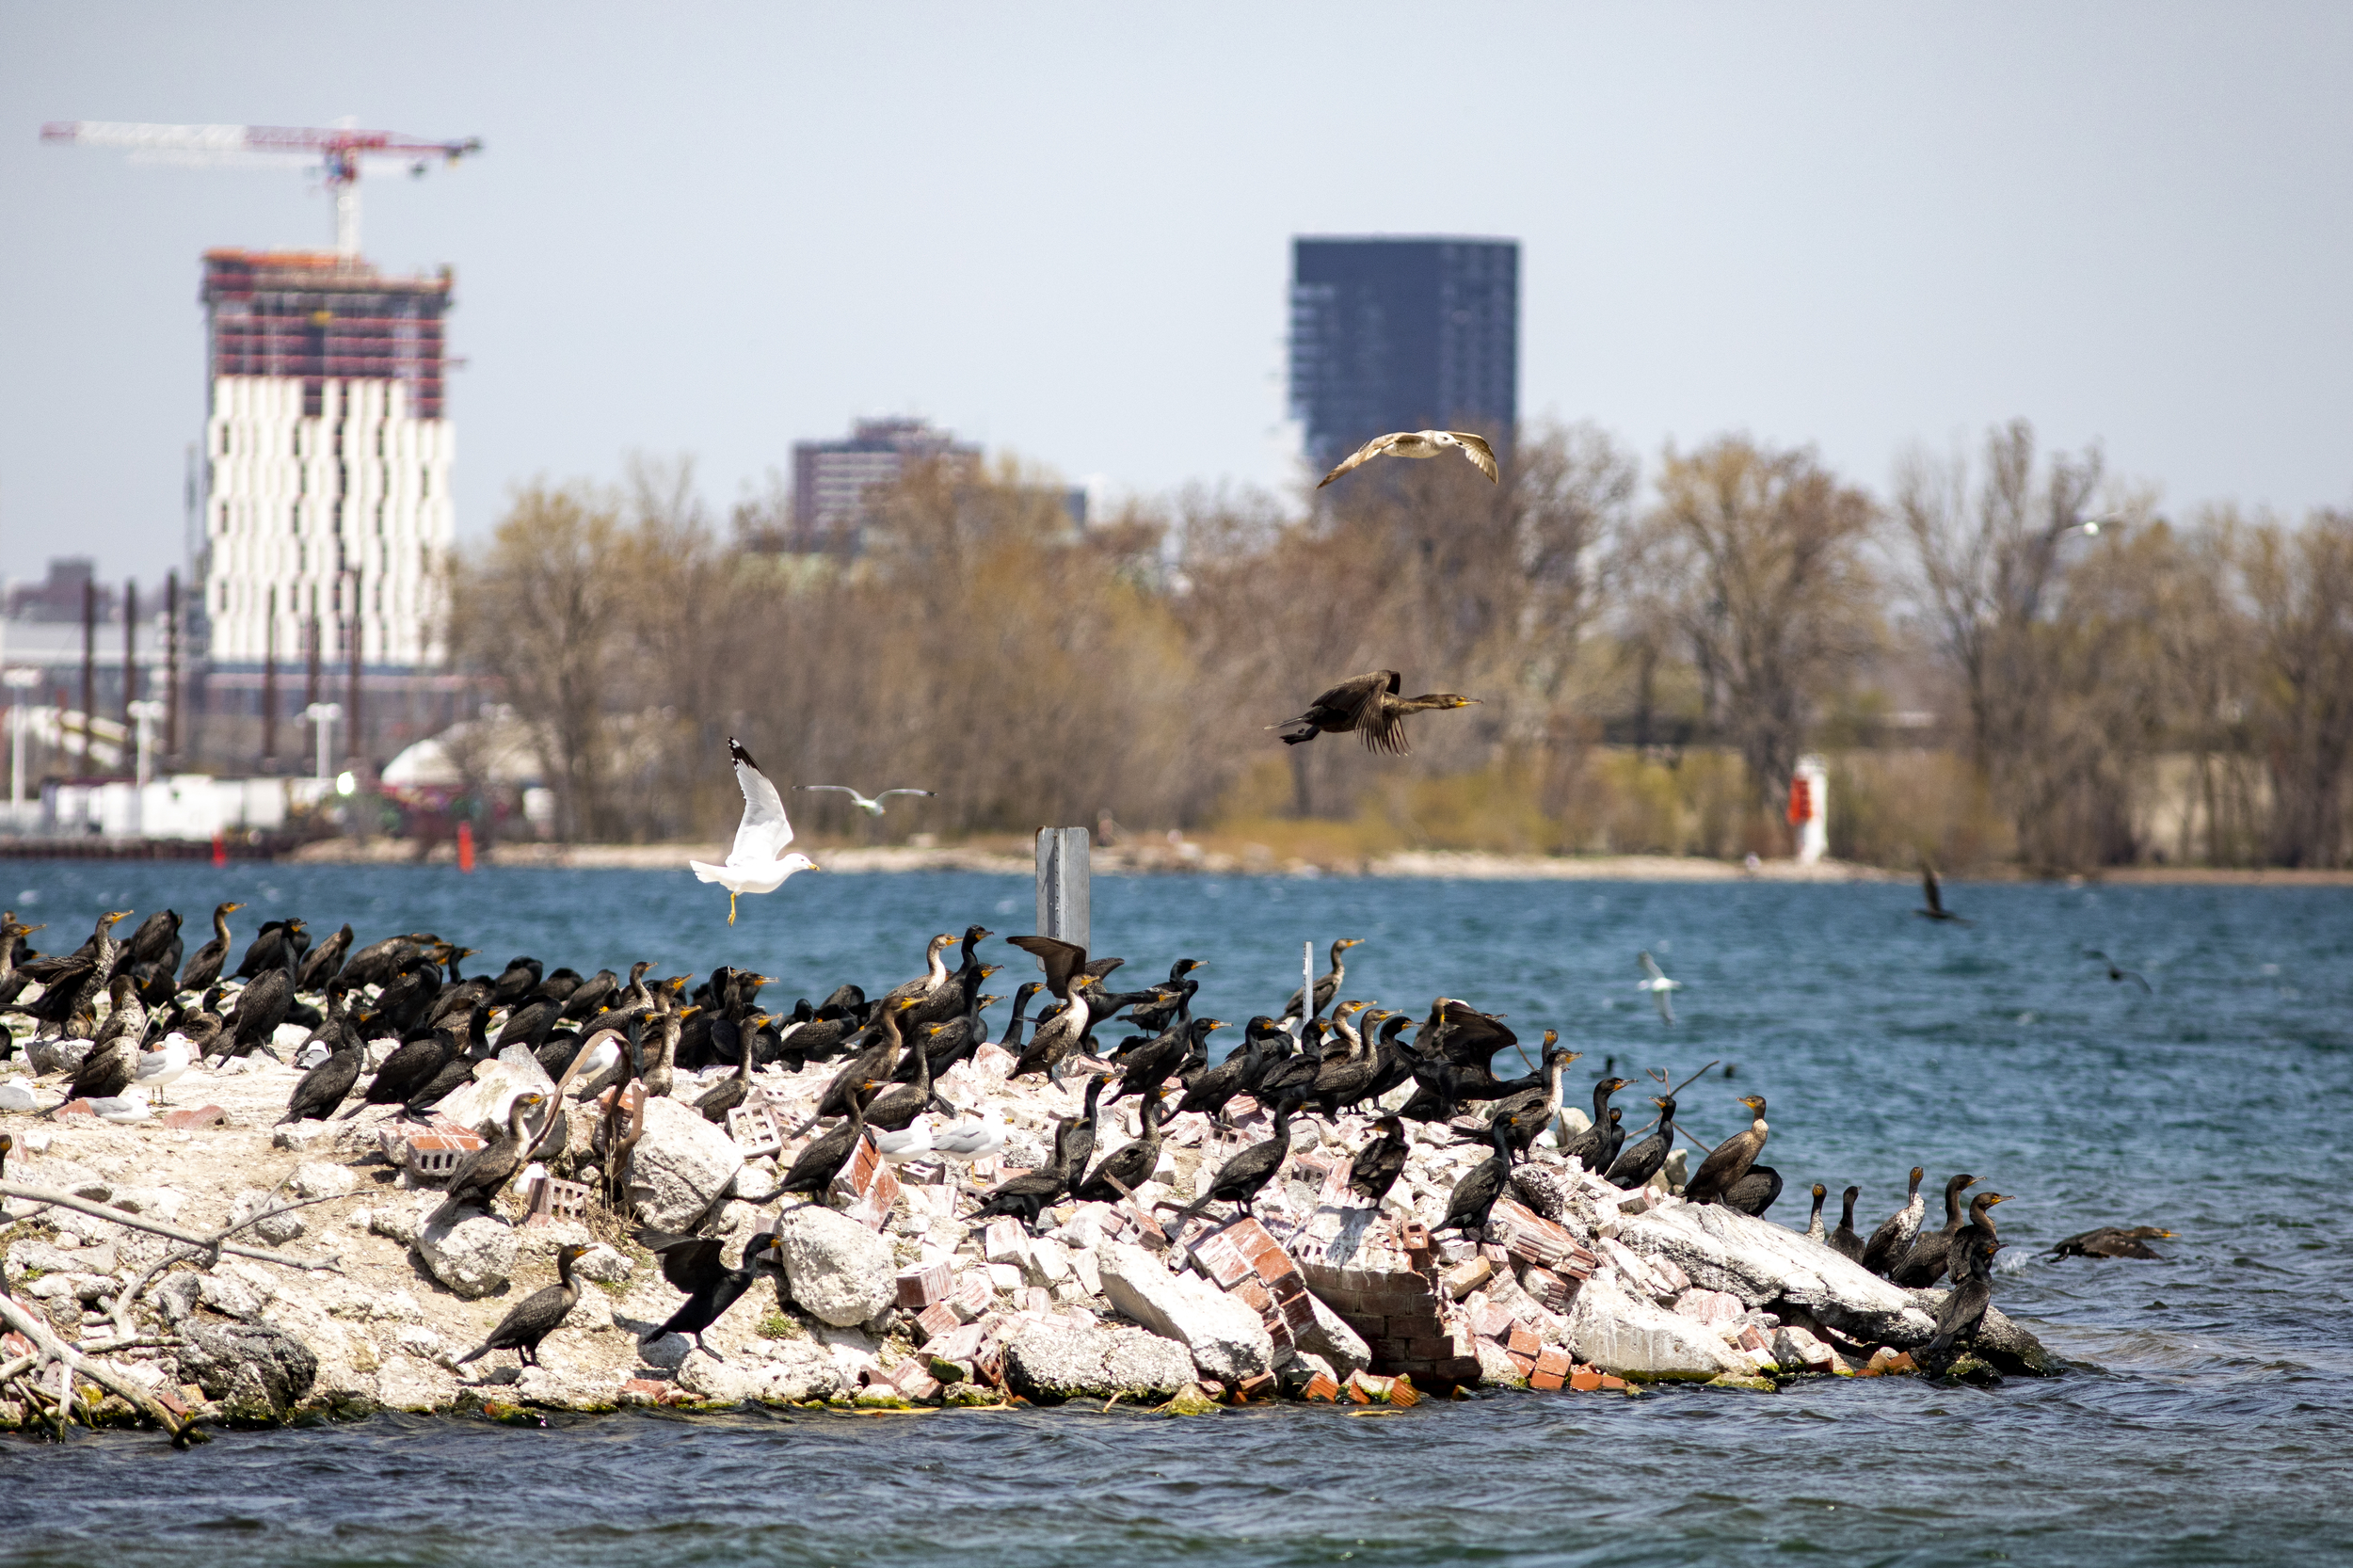 A rocky shoreline covered in cormorants and seagulls